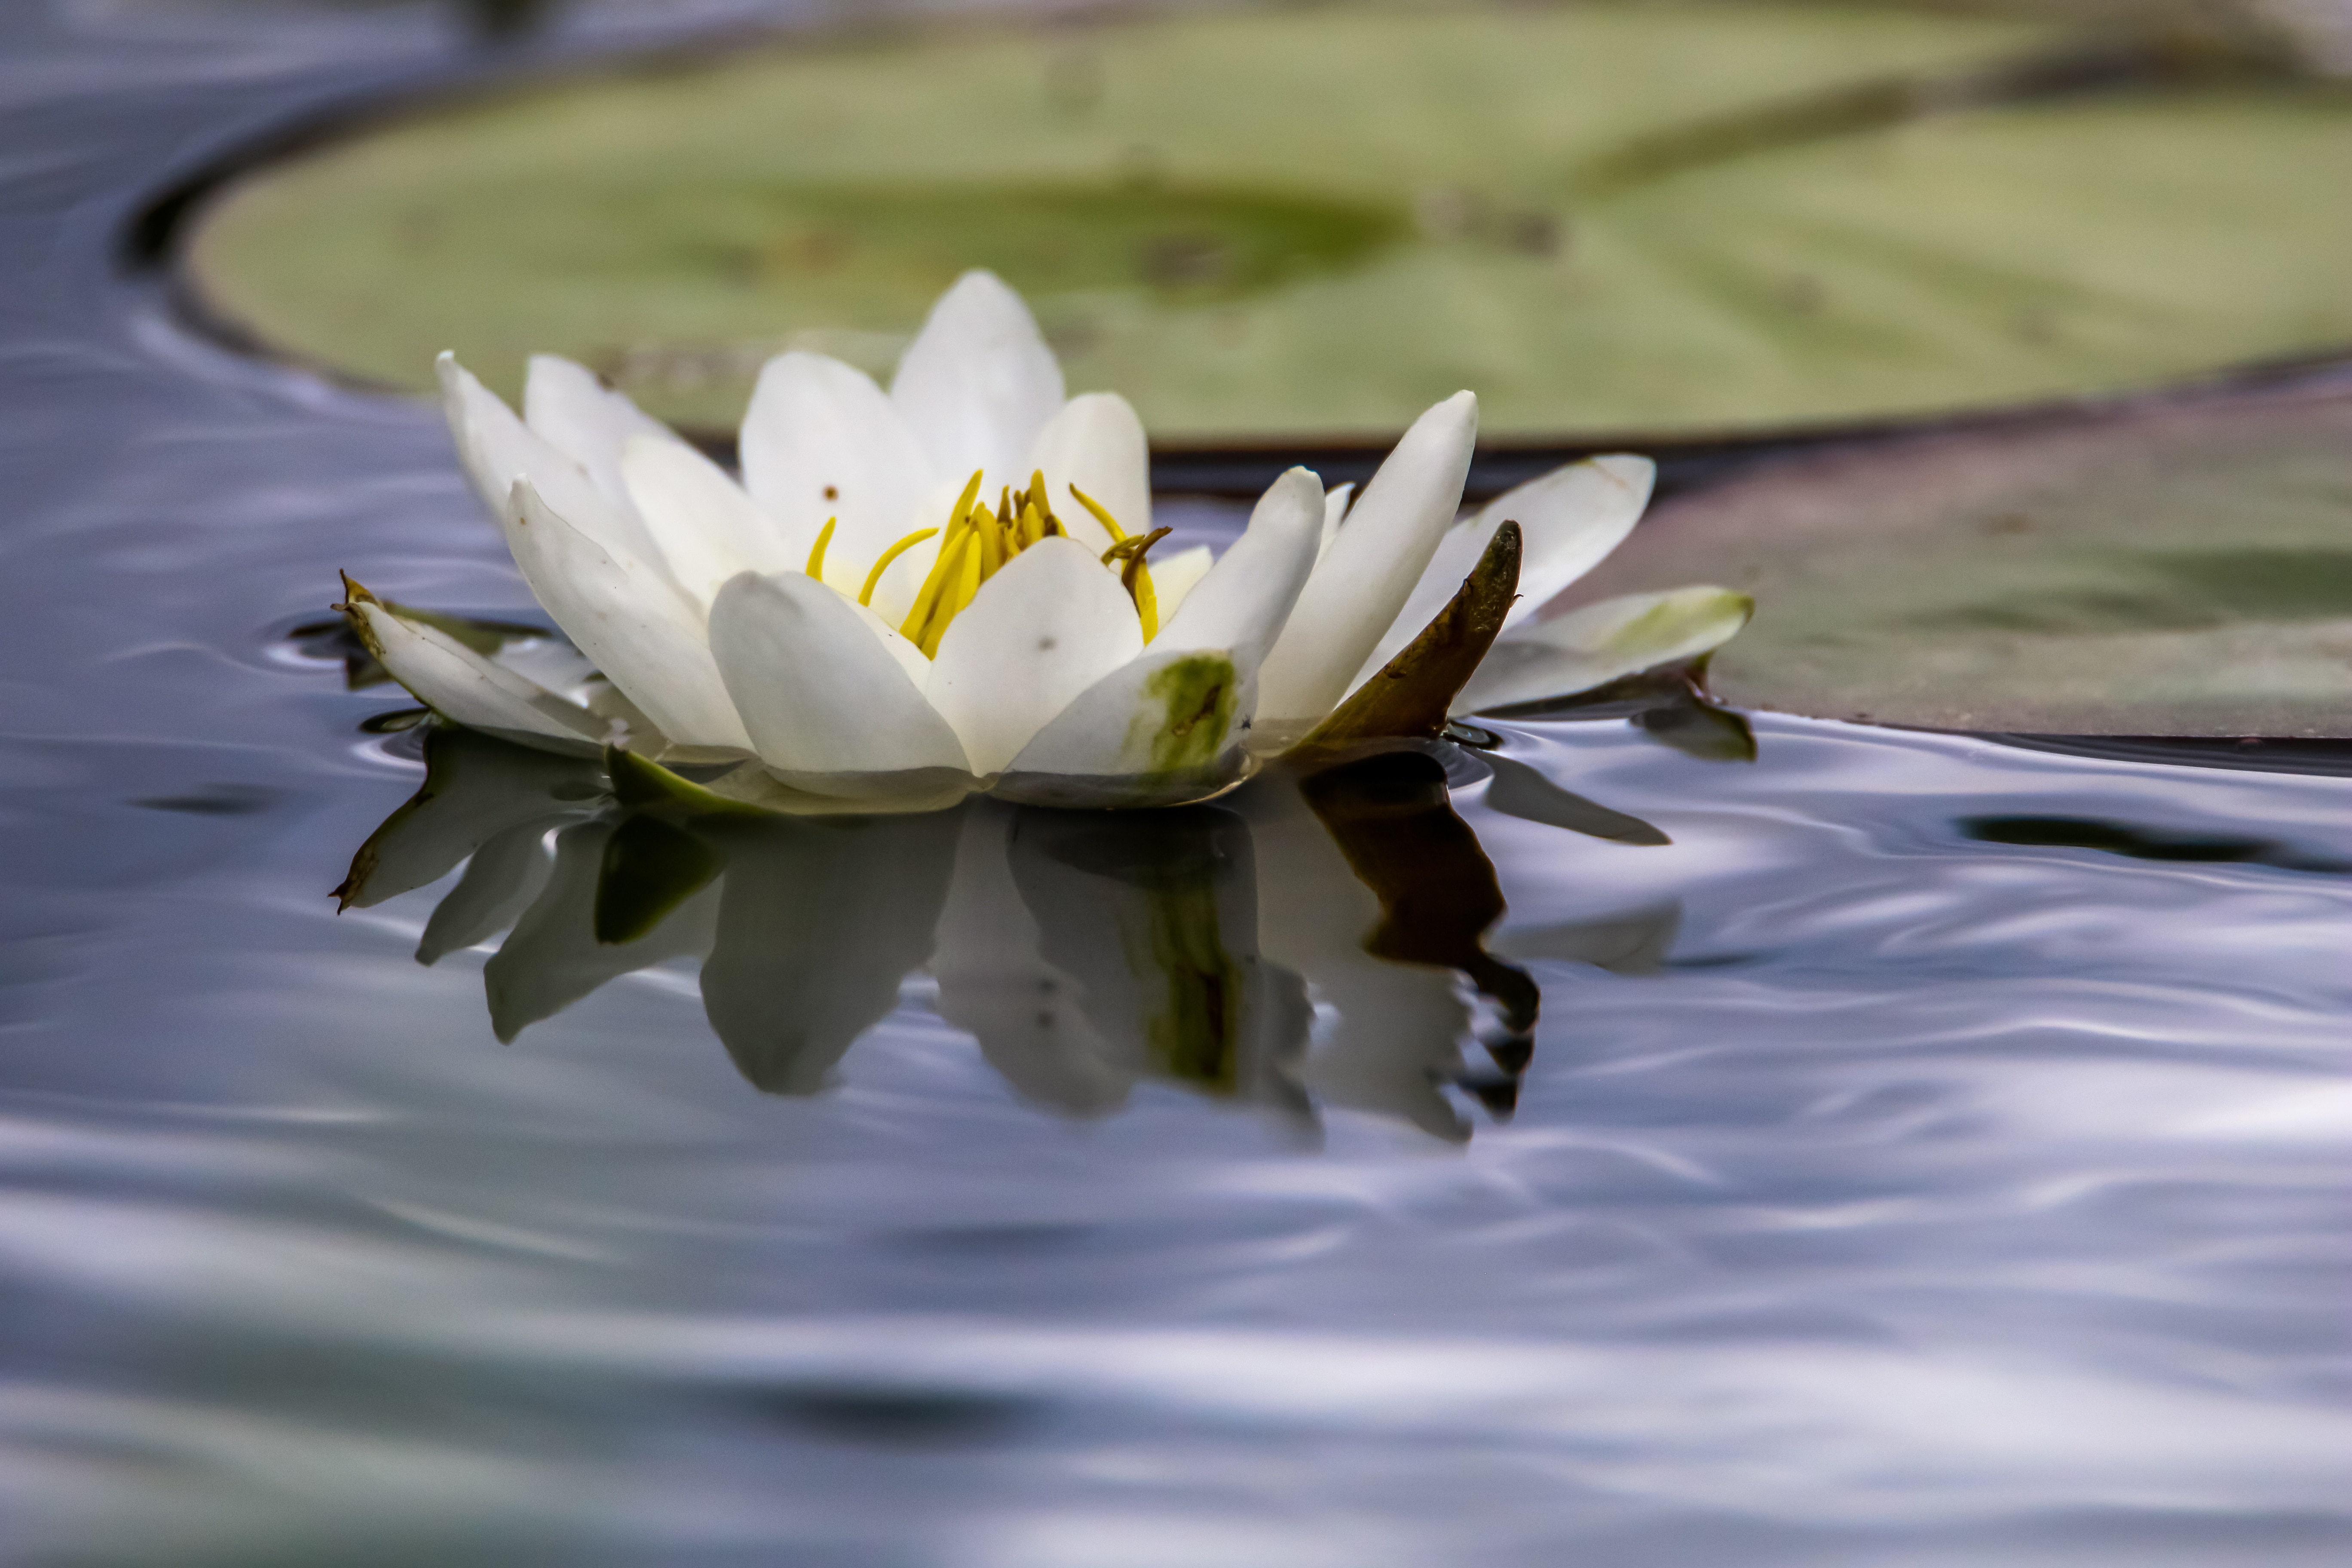 White water lilies bloom in the river, Latvia. Water lily flower with green leaves in the water. White water lily in river as background.